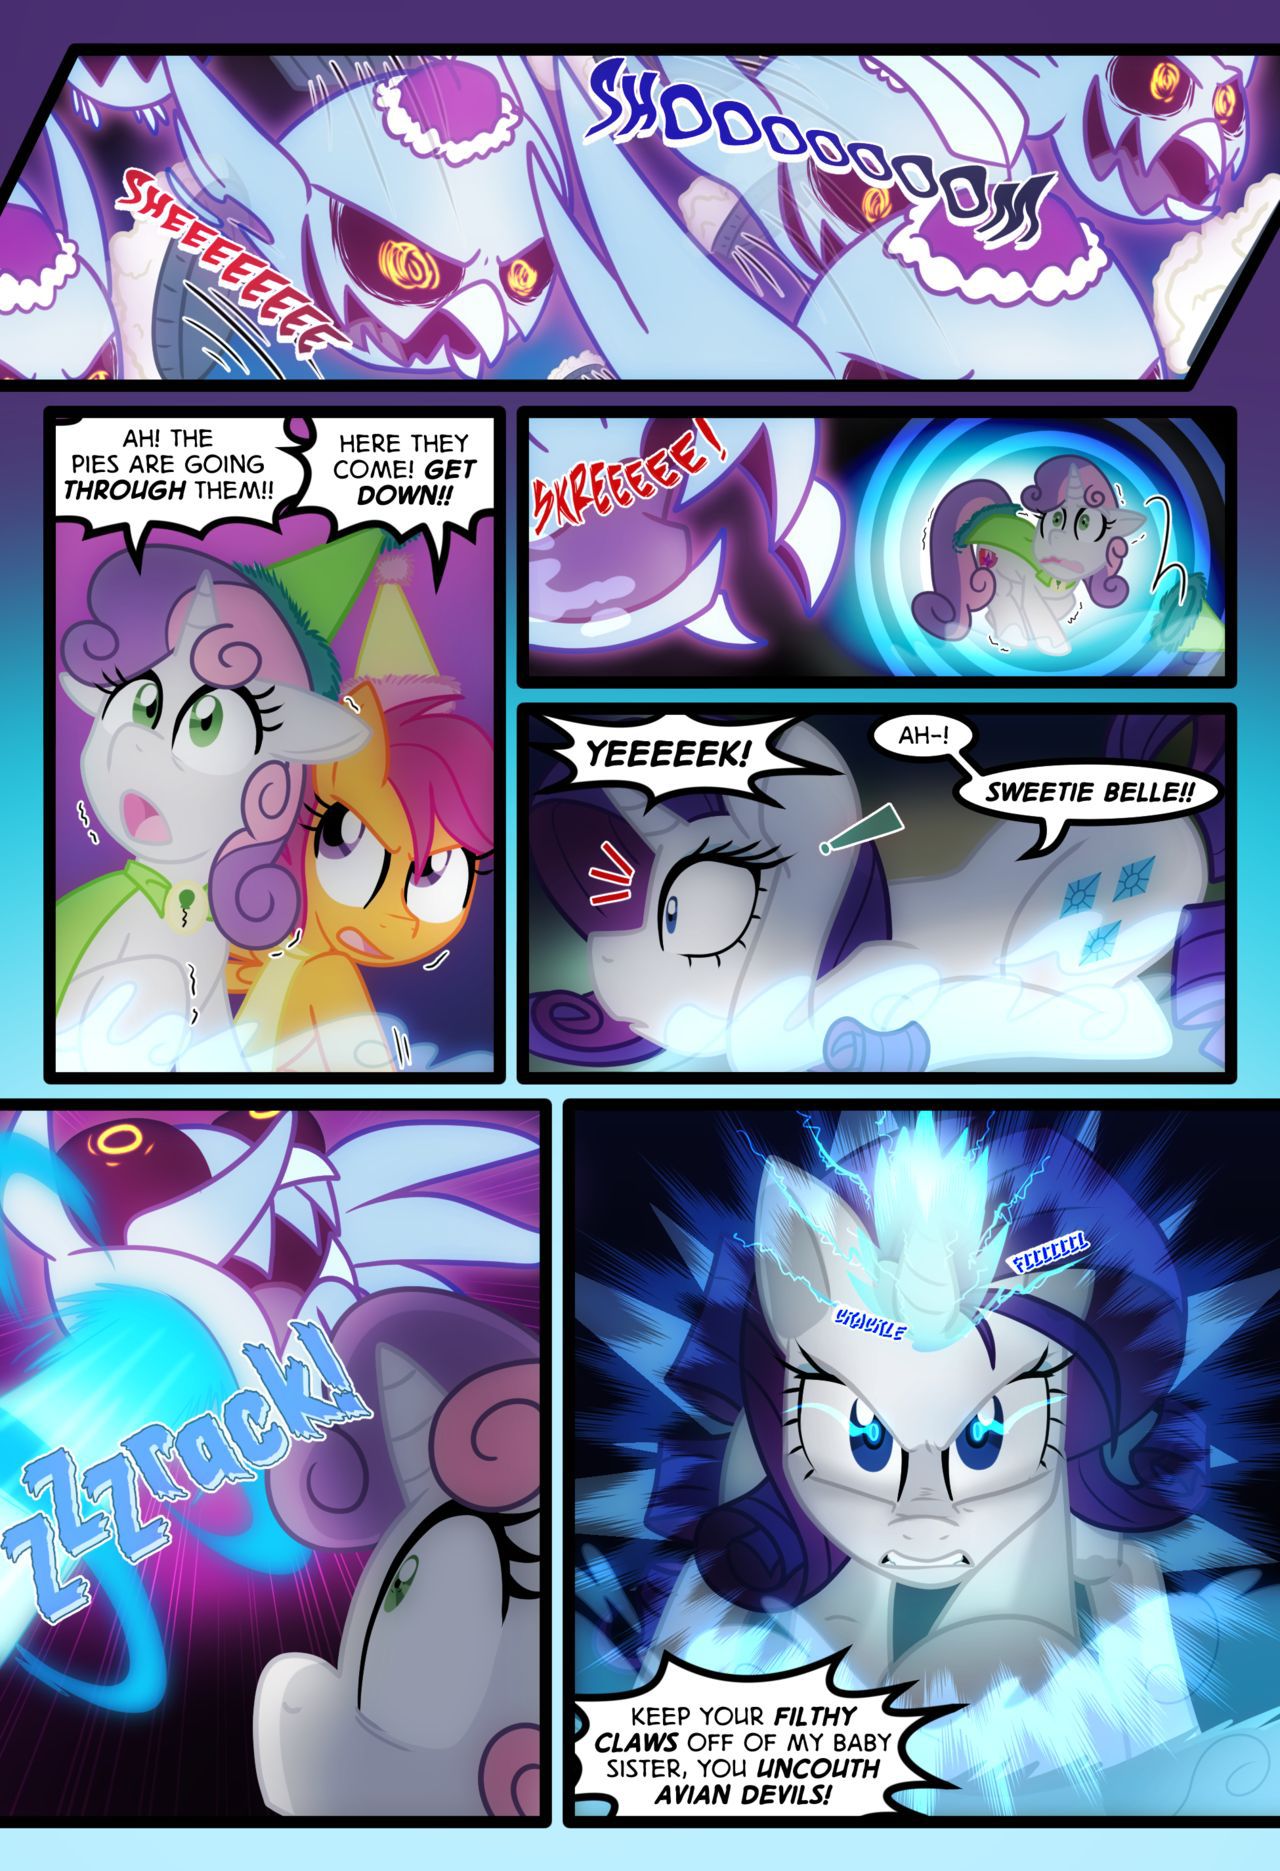 [Zaron] Lonely Hooves (My Little Pony Friendship Is Magic) [Ongoing] 146